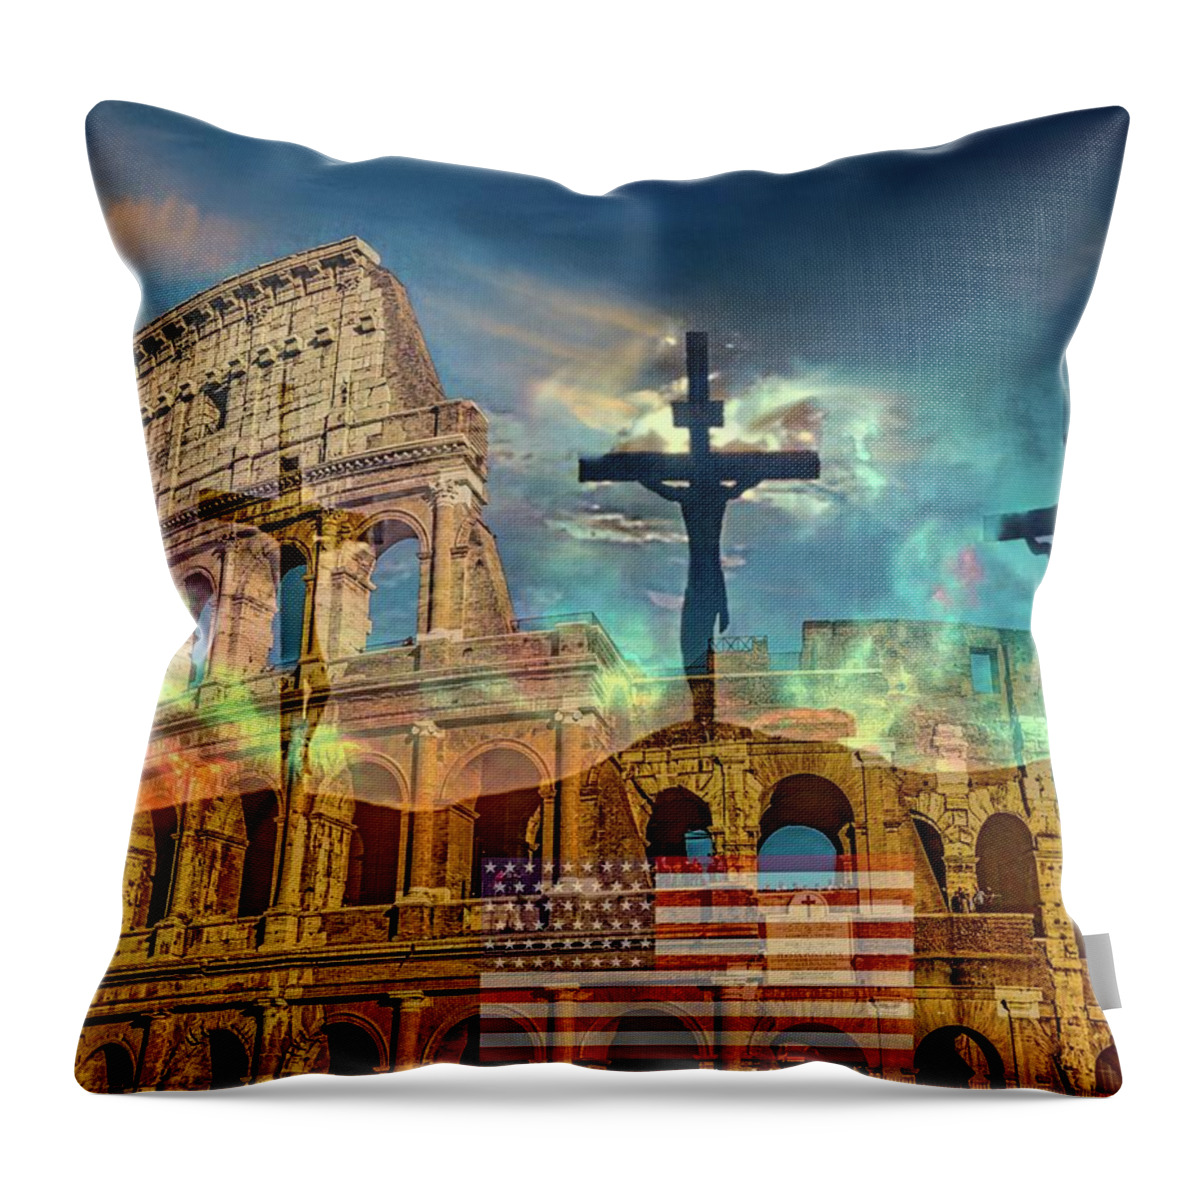 Jesus Throw Pillow featuring the digital art Nations Rise and Fall by Norman Brule